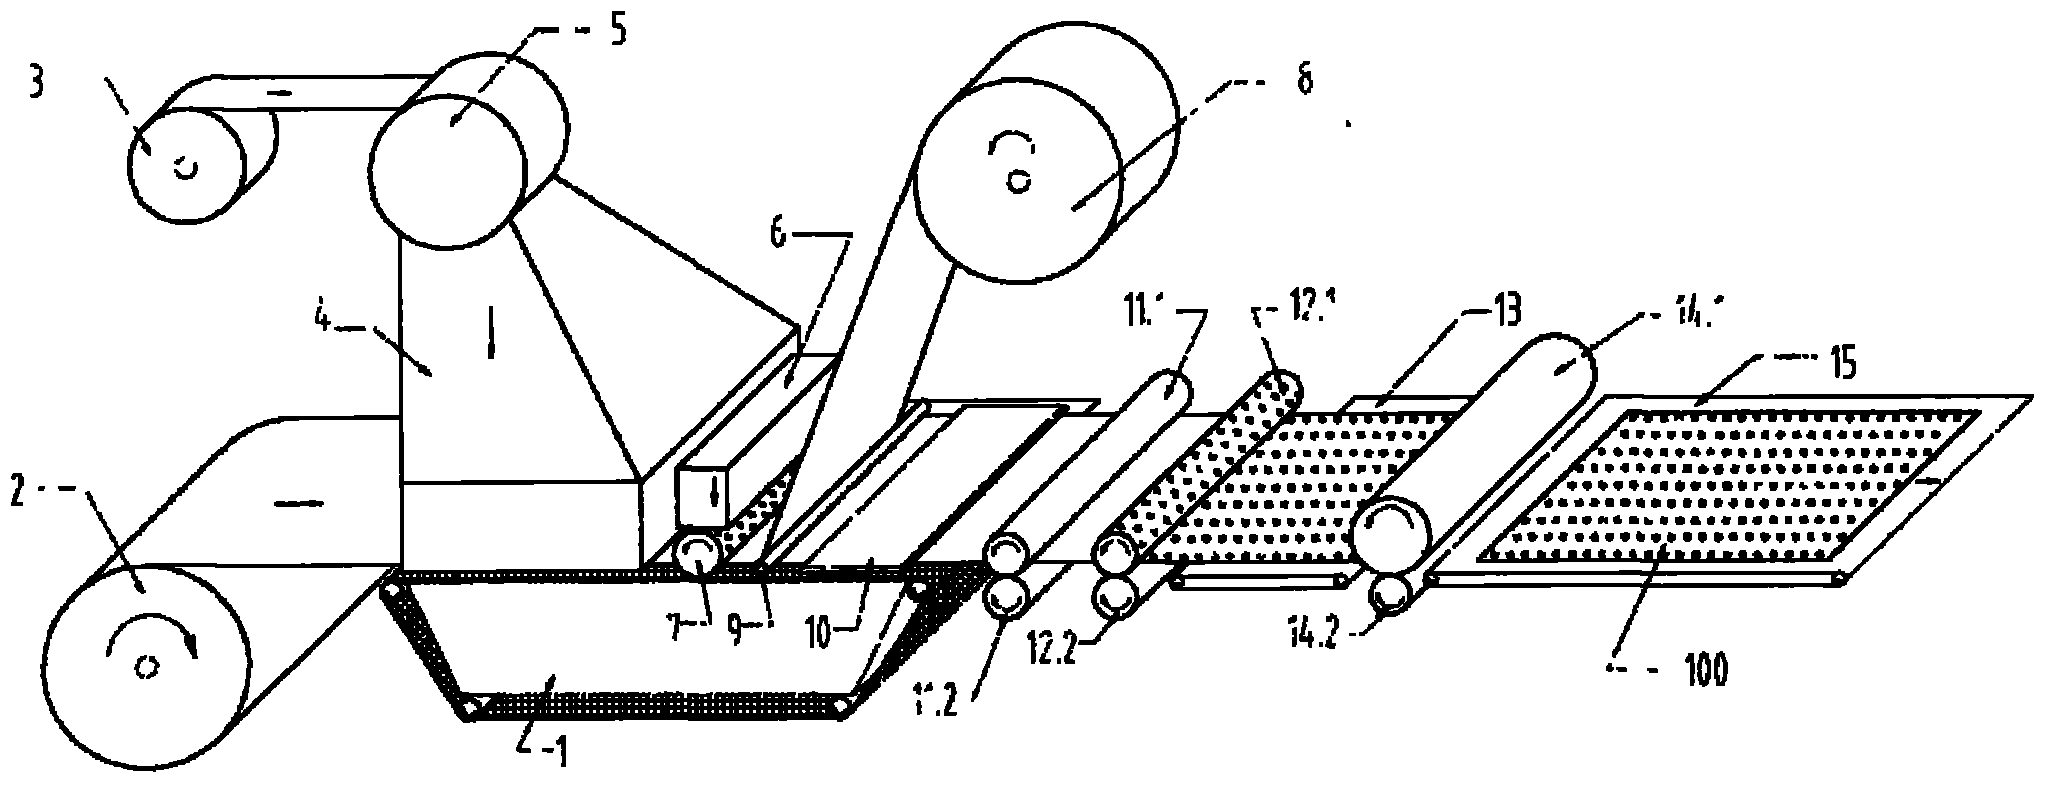 Health nursing pad absorber processing method and equipment thereof